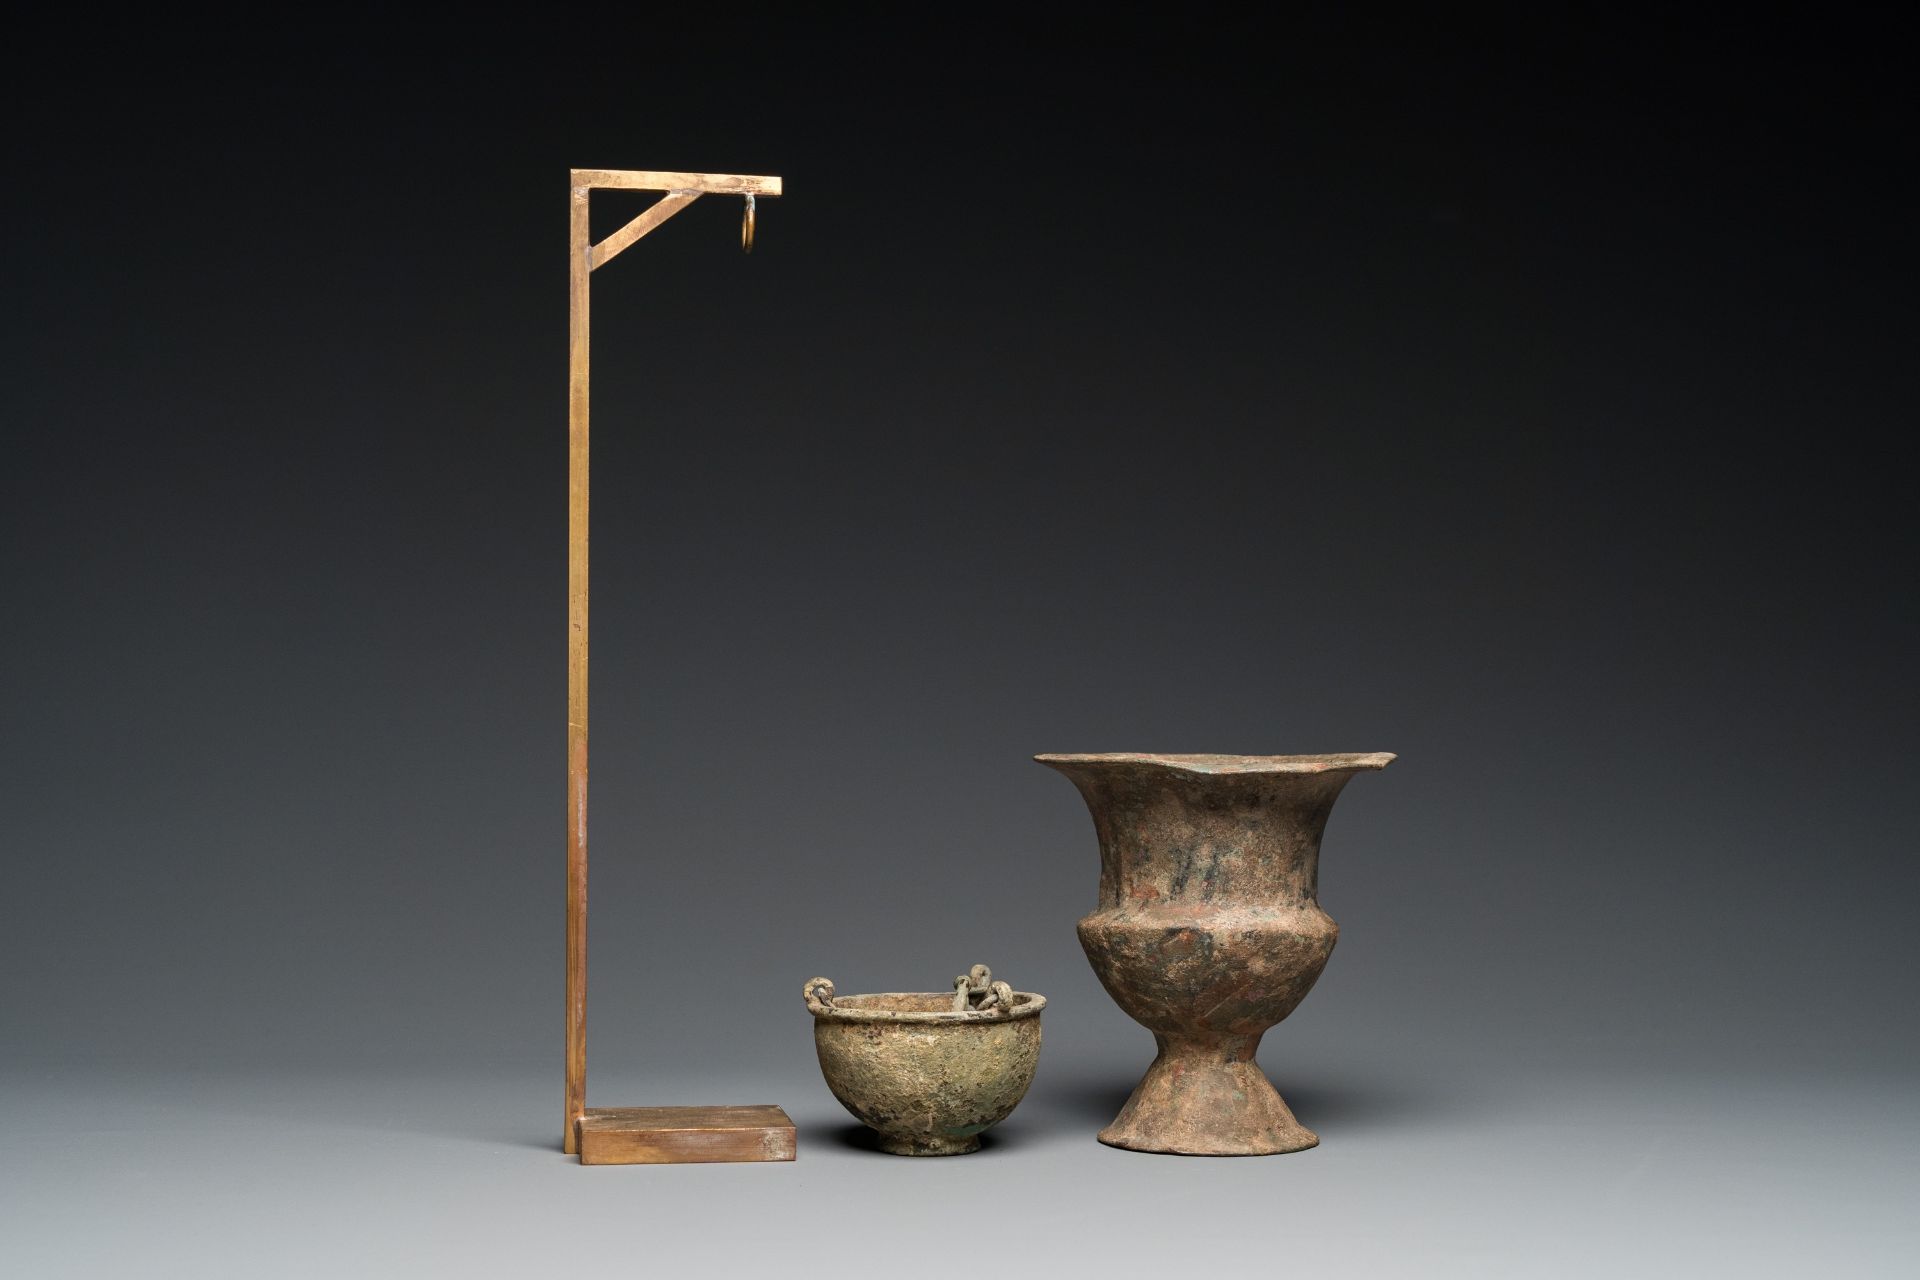 A Byzantine or Roman bronze vase and a hanging incense burner, 5/7th C. - Image 7 of 9